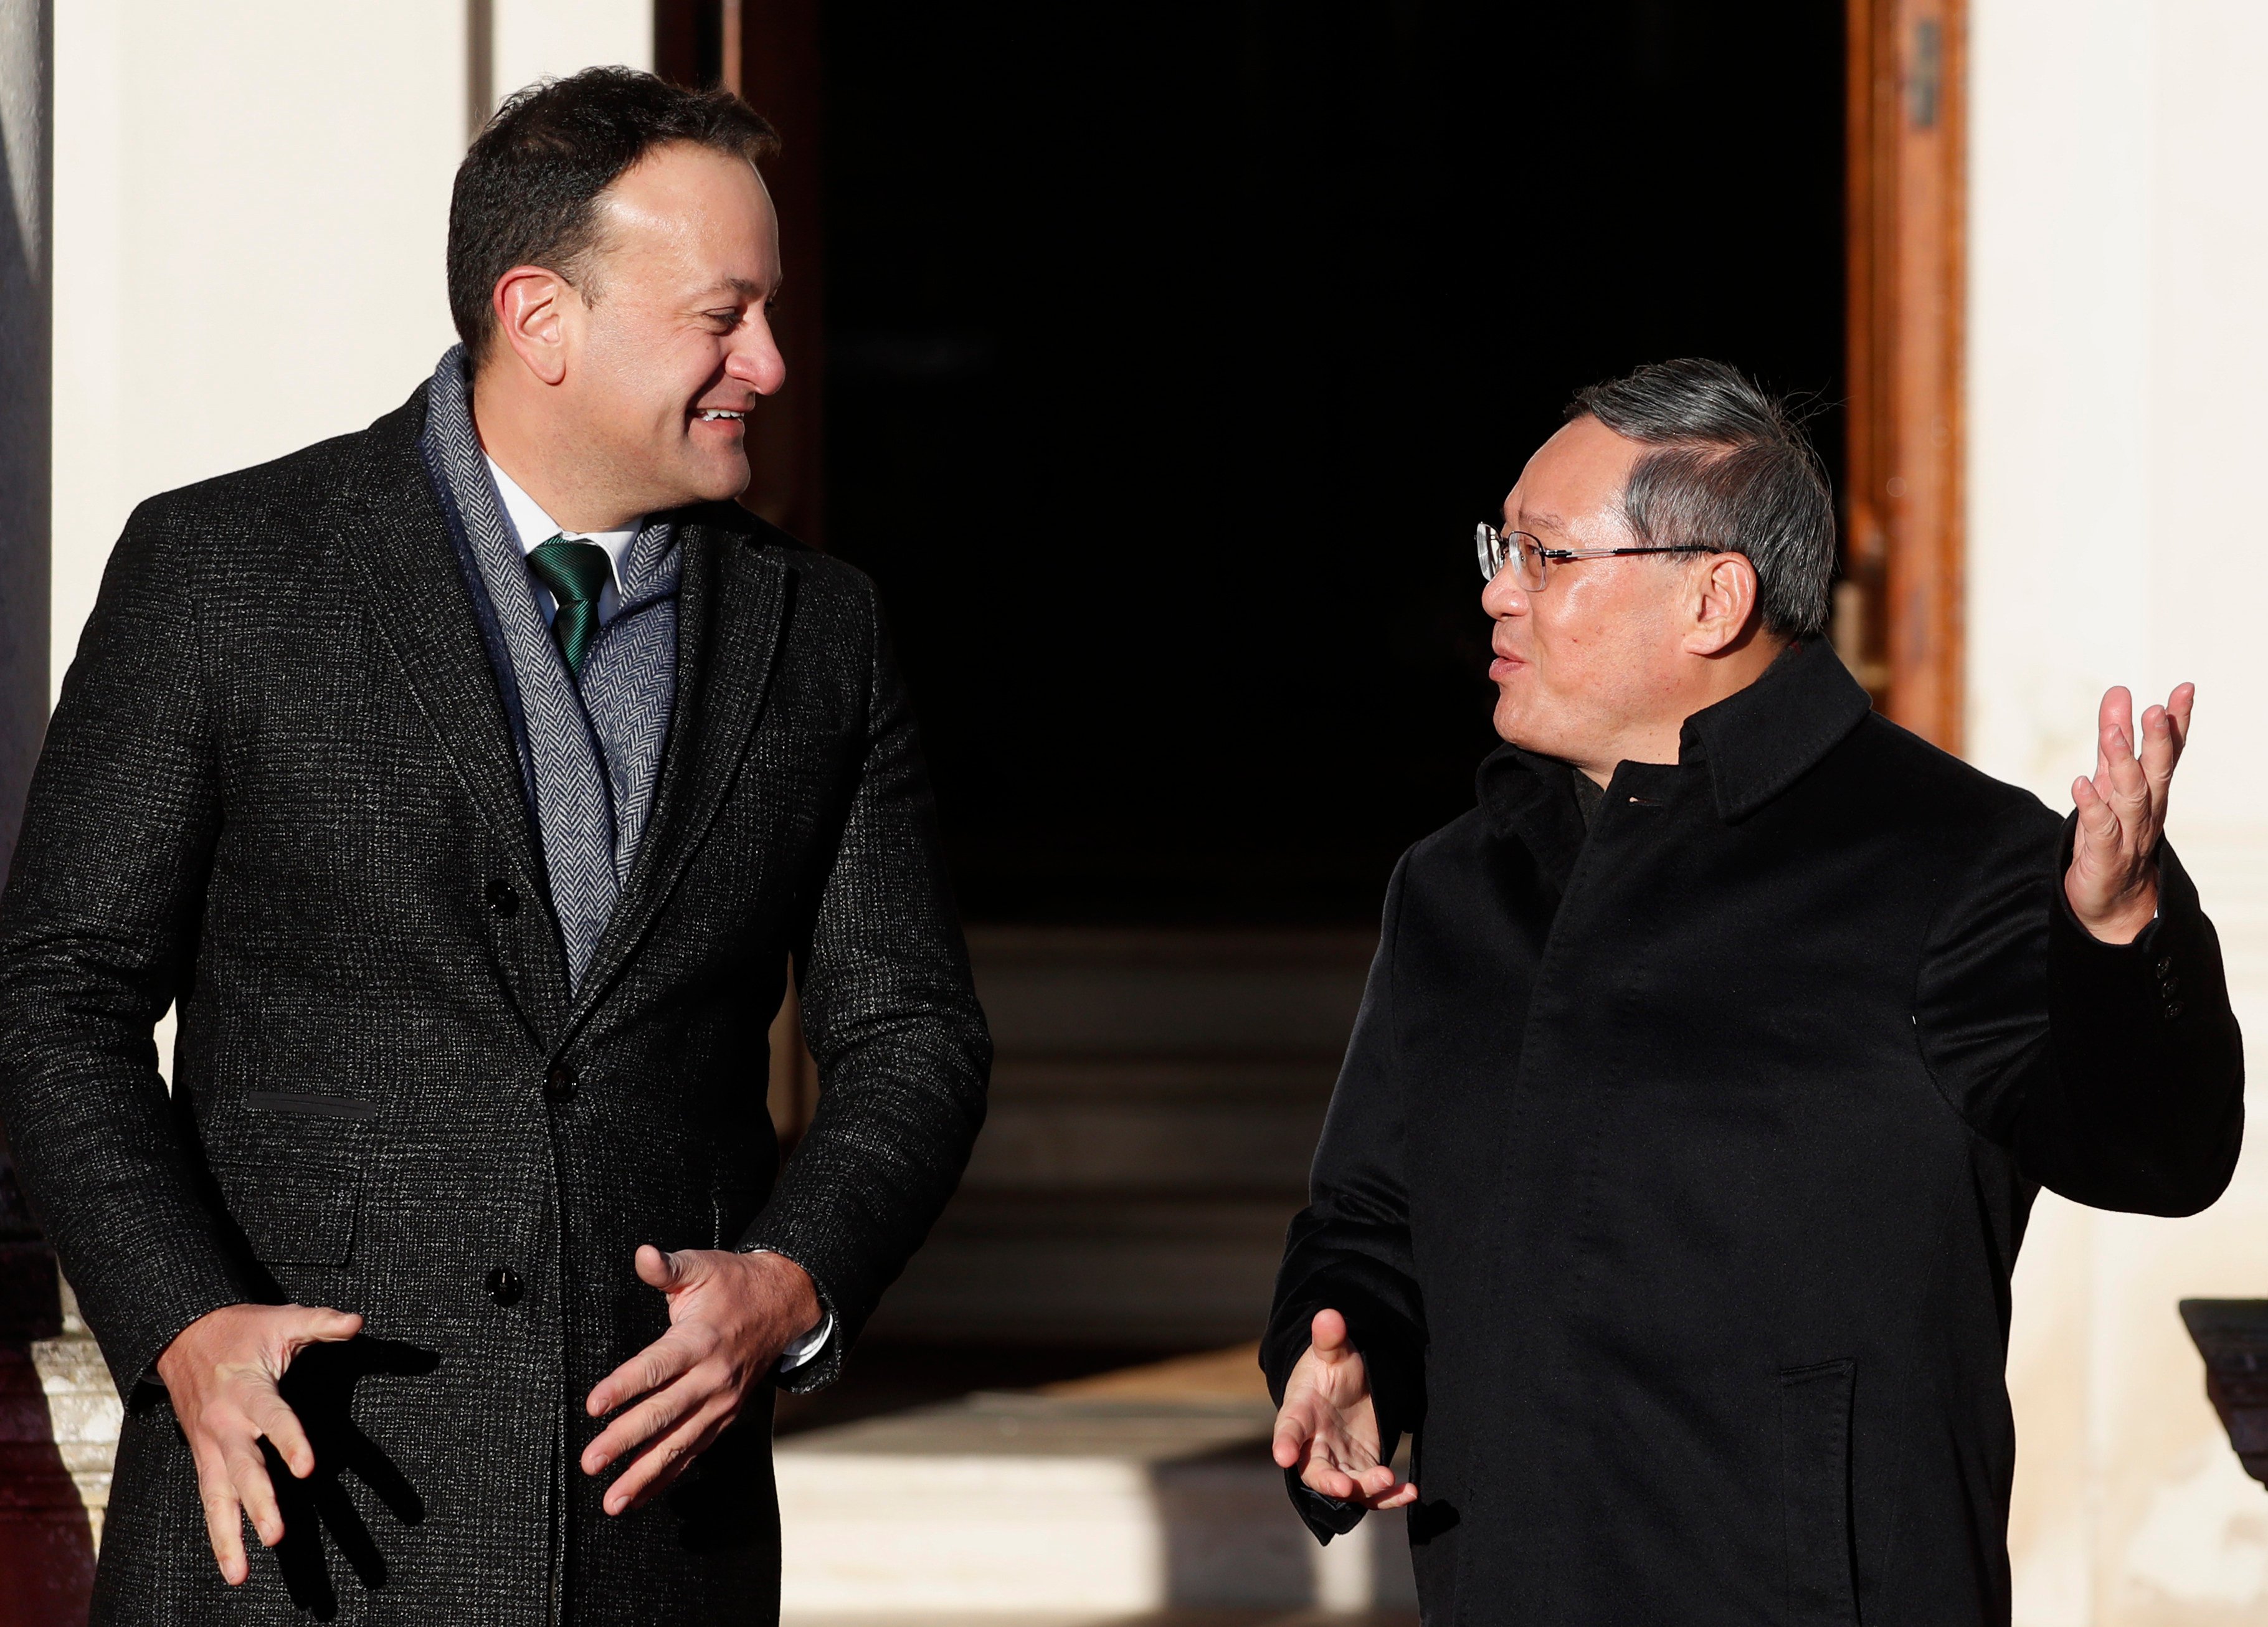 Chinese Premier Li Qiang (right) is greeted by Ireland’s Prime Minister Leo Varadkar in Dublin on January 17. On Wednesday, the European Commission will unveil details on its economic security strategy. Photo: AP